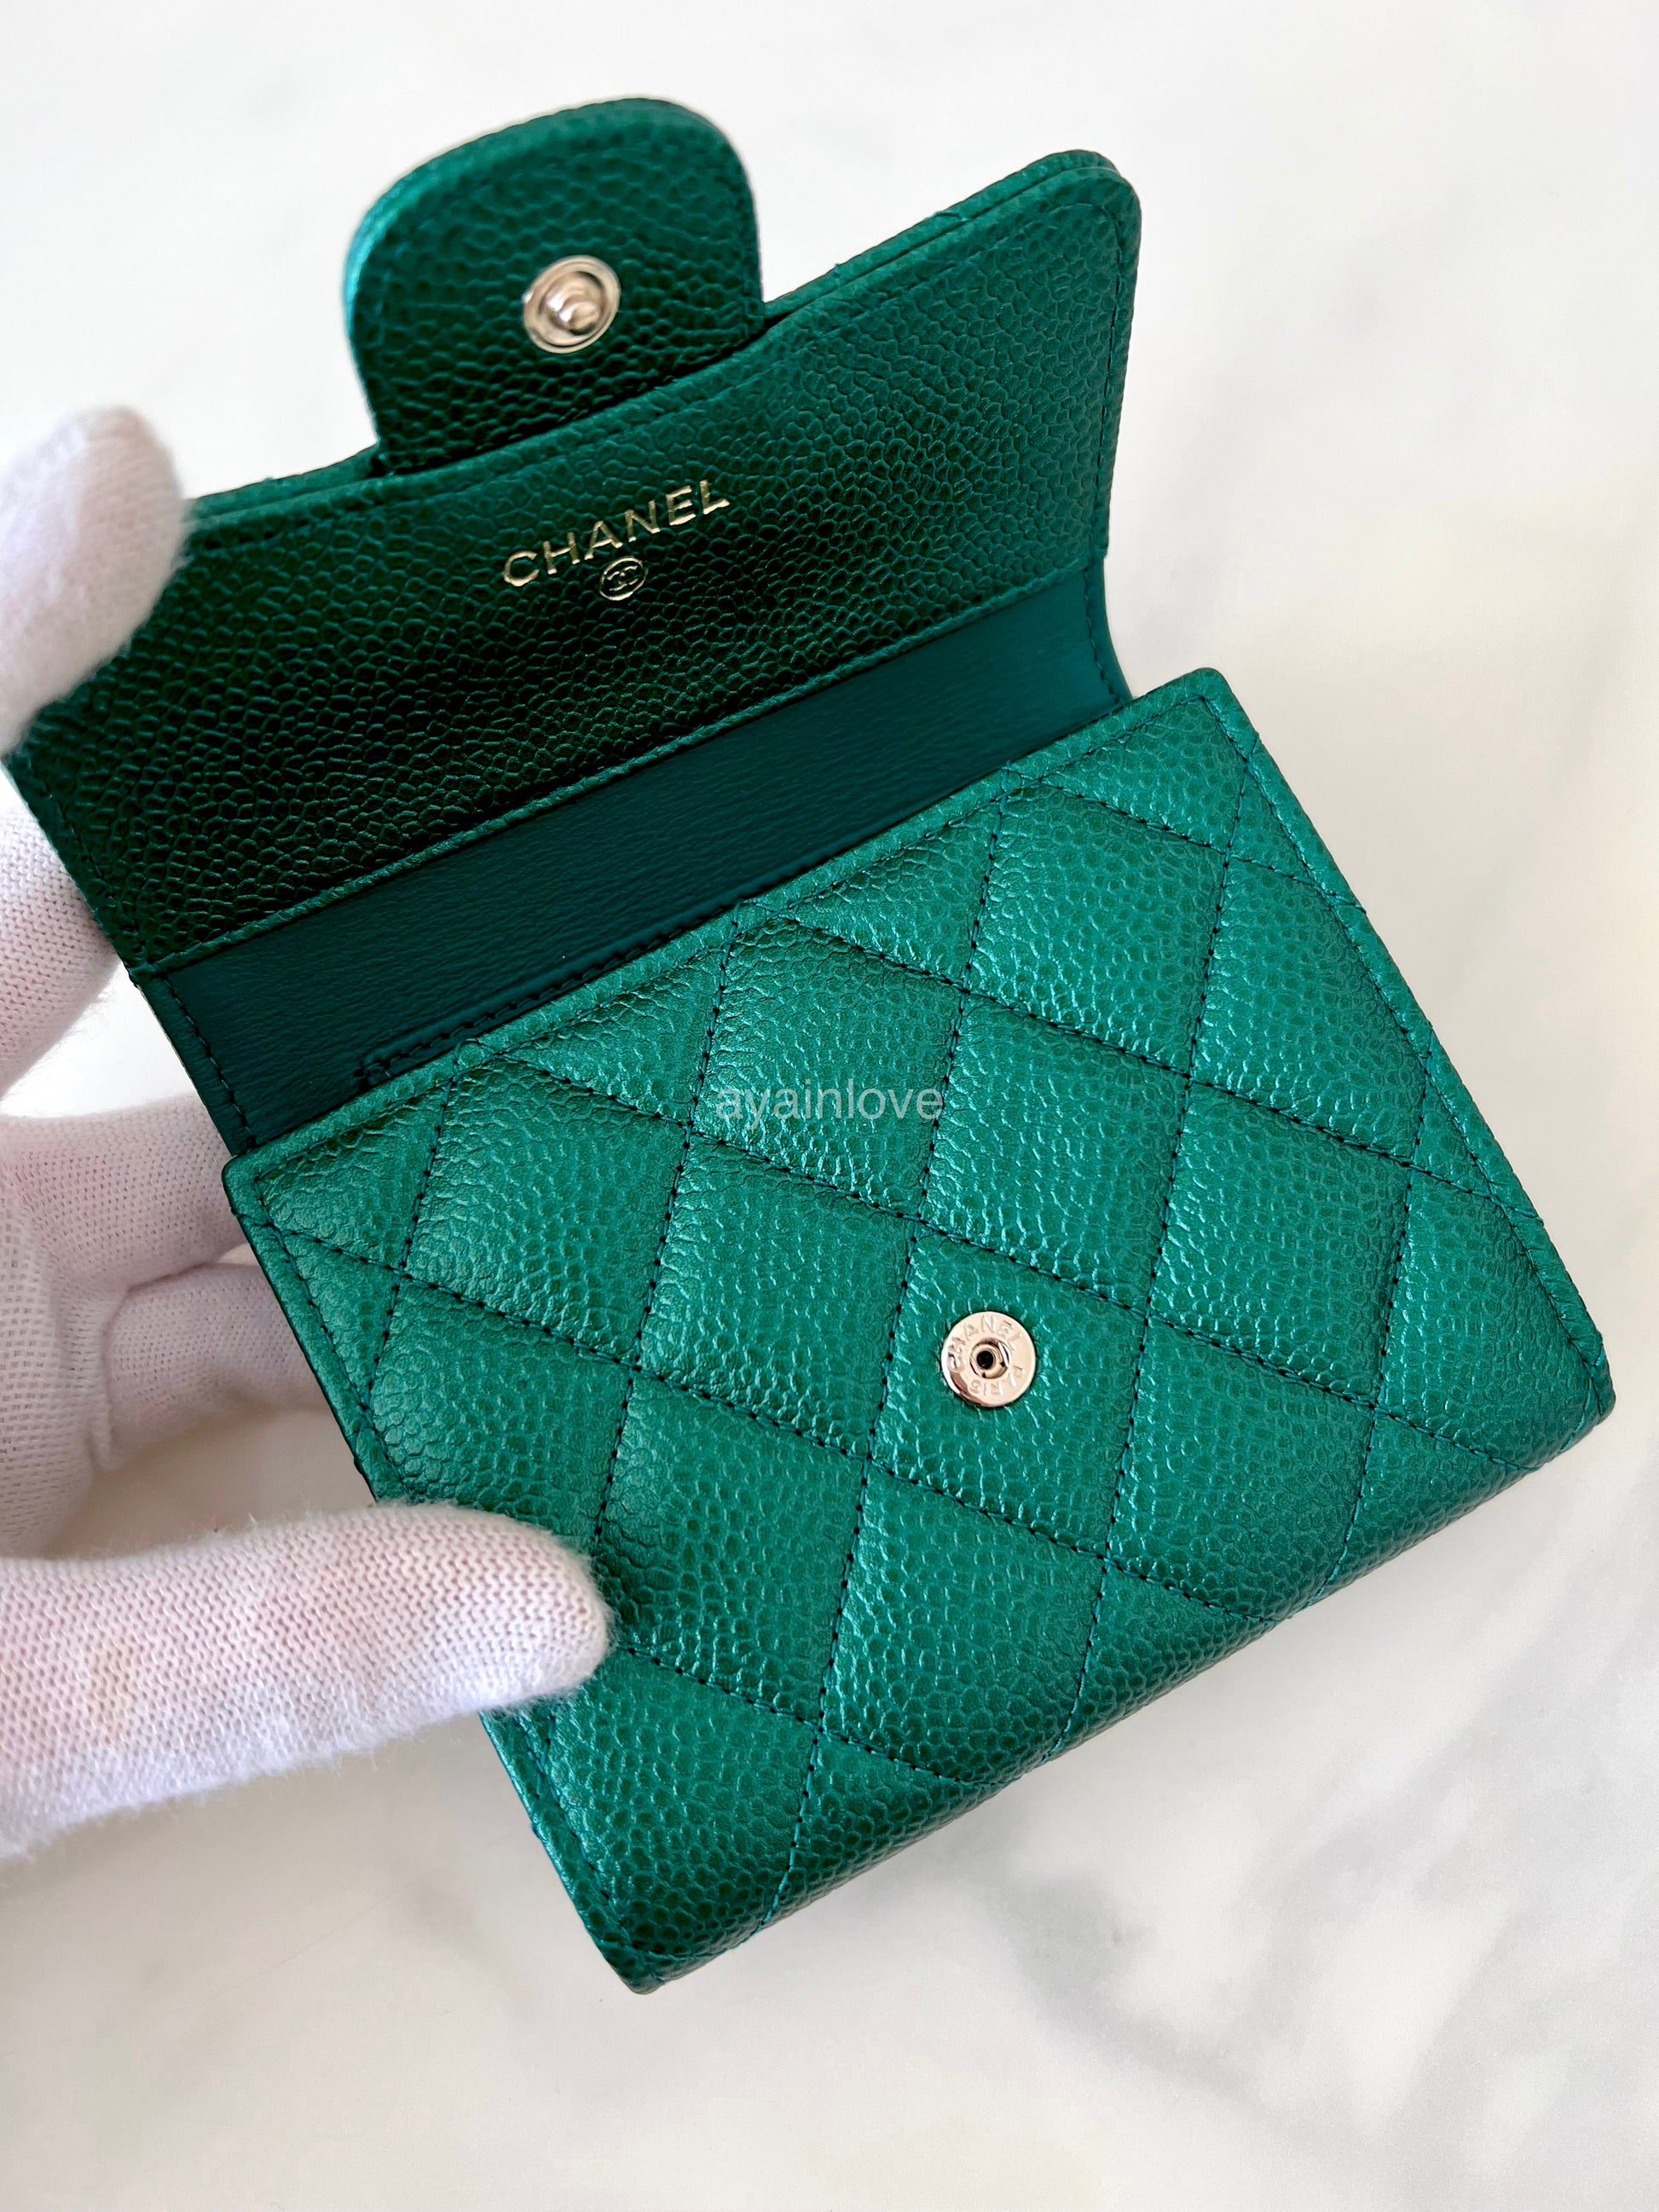 CHANEL 18S Iridescent Green Caviar Trifold Wallet Light Gold Hardware –  AYAINLOVE CURATED LUXURIES